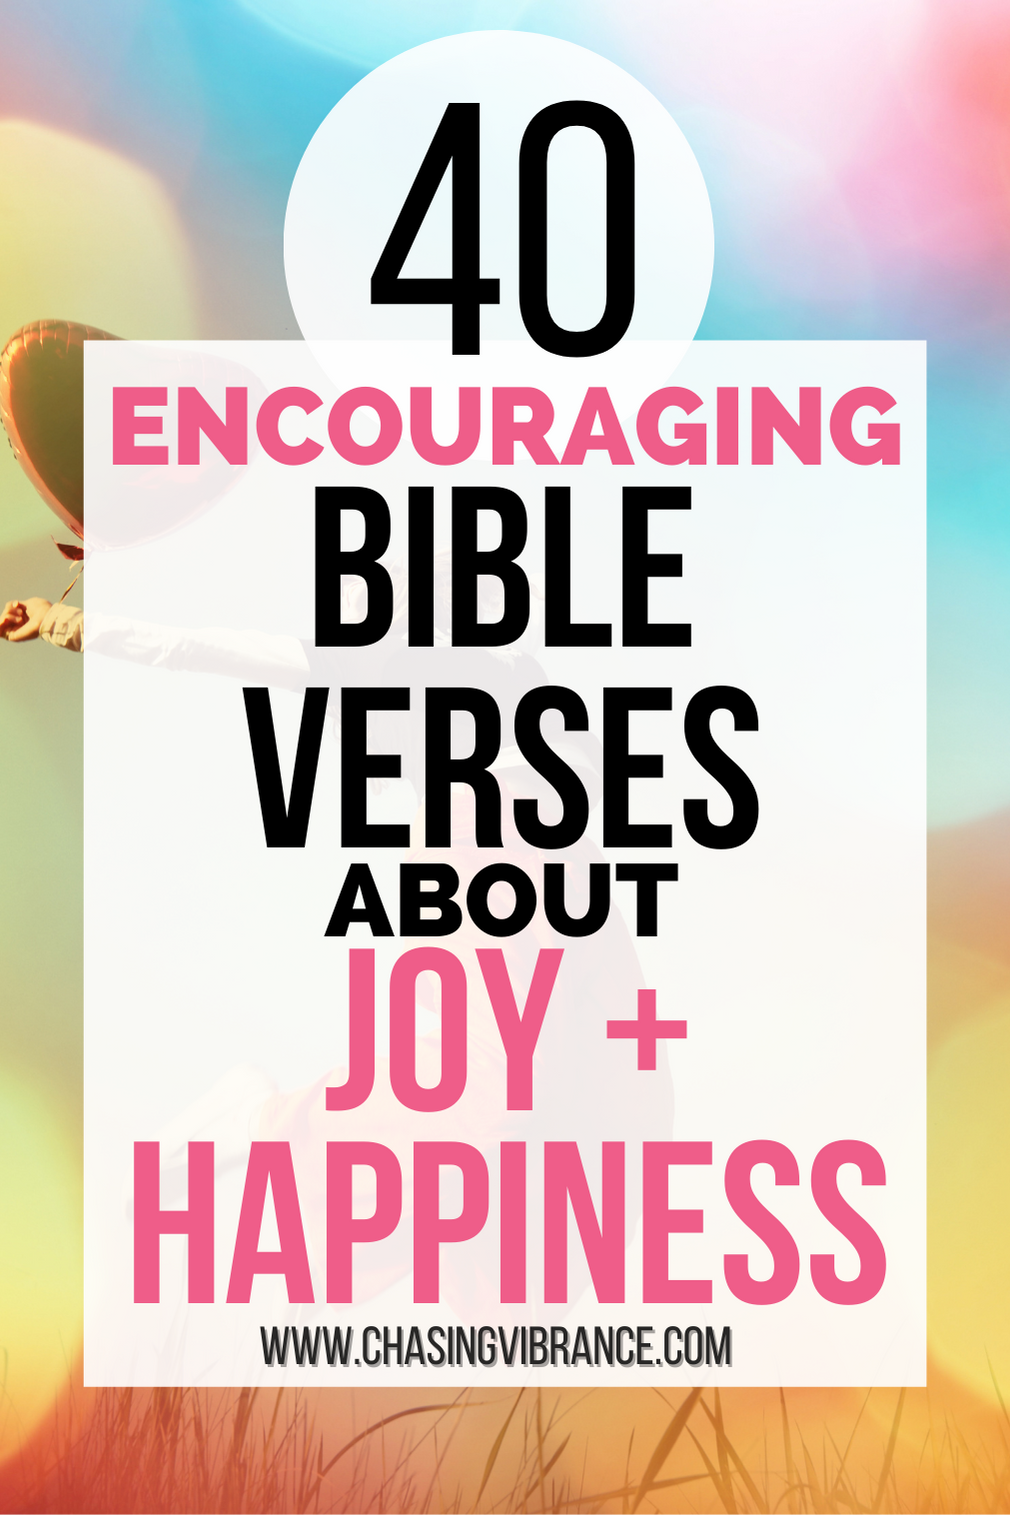 Bright and happy sunflare pink and blue background with text overlay: 40 encouraging Bible verses about joy and happiness